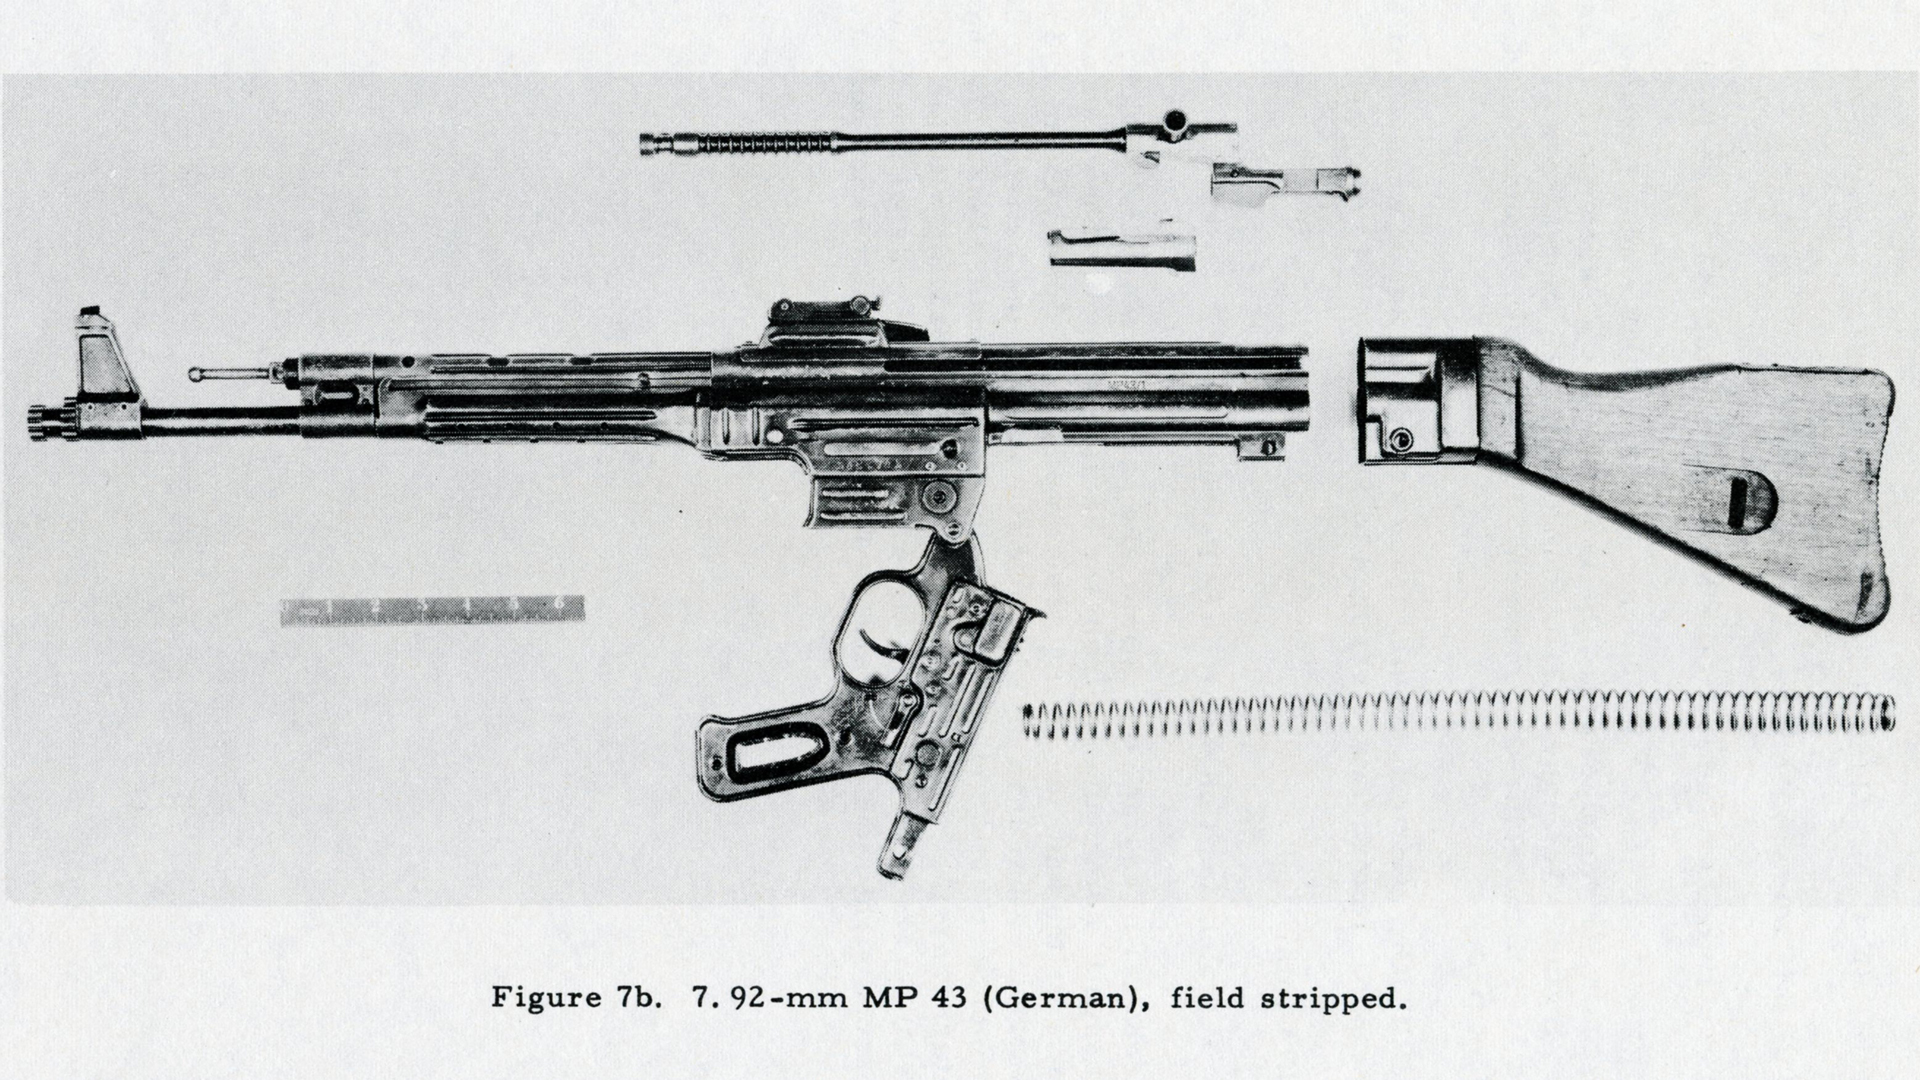 U.S. Ordnance images of a “MP43” used in a postwar review. Photo courtesy of author’s collection.